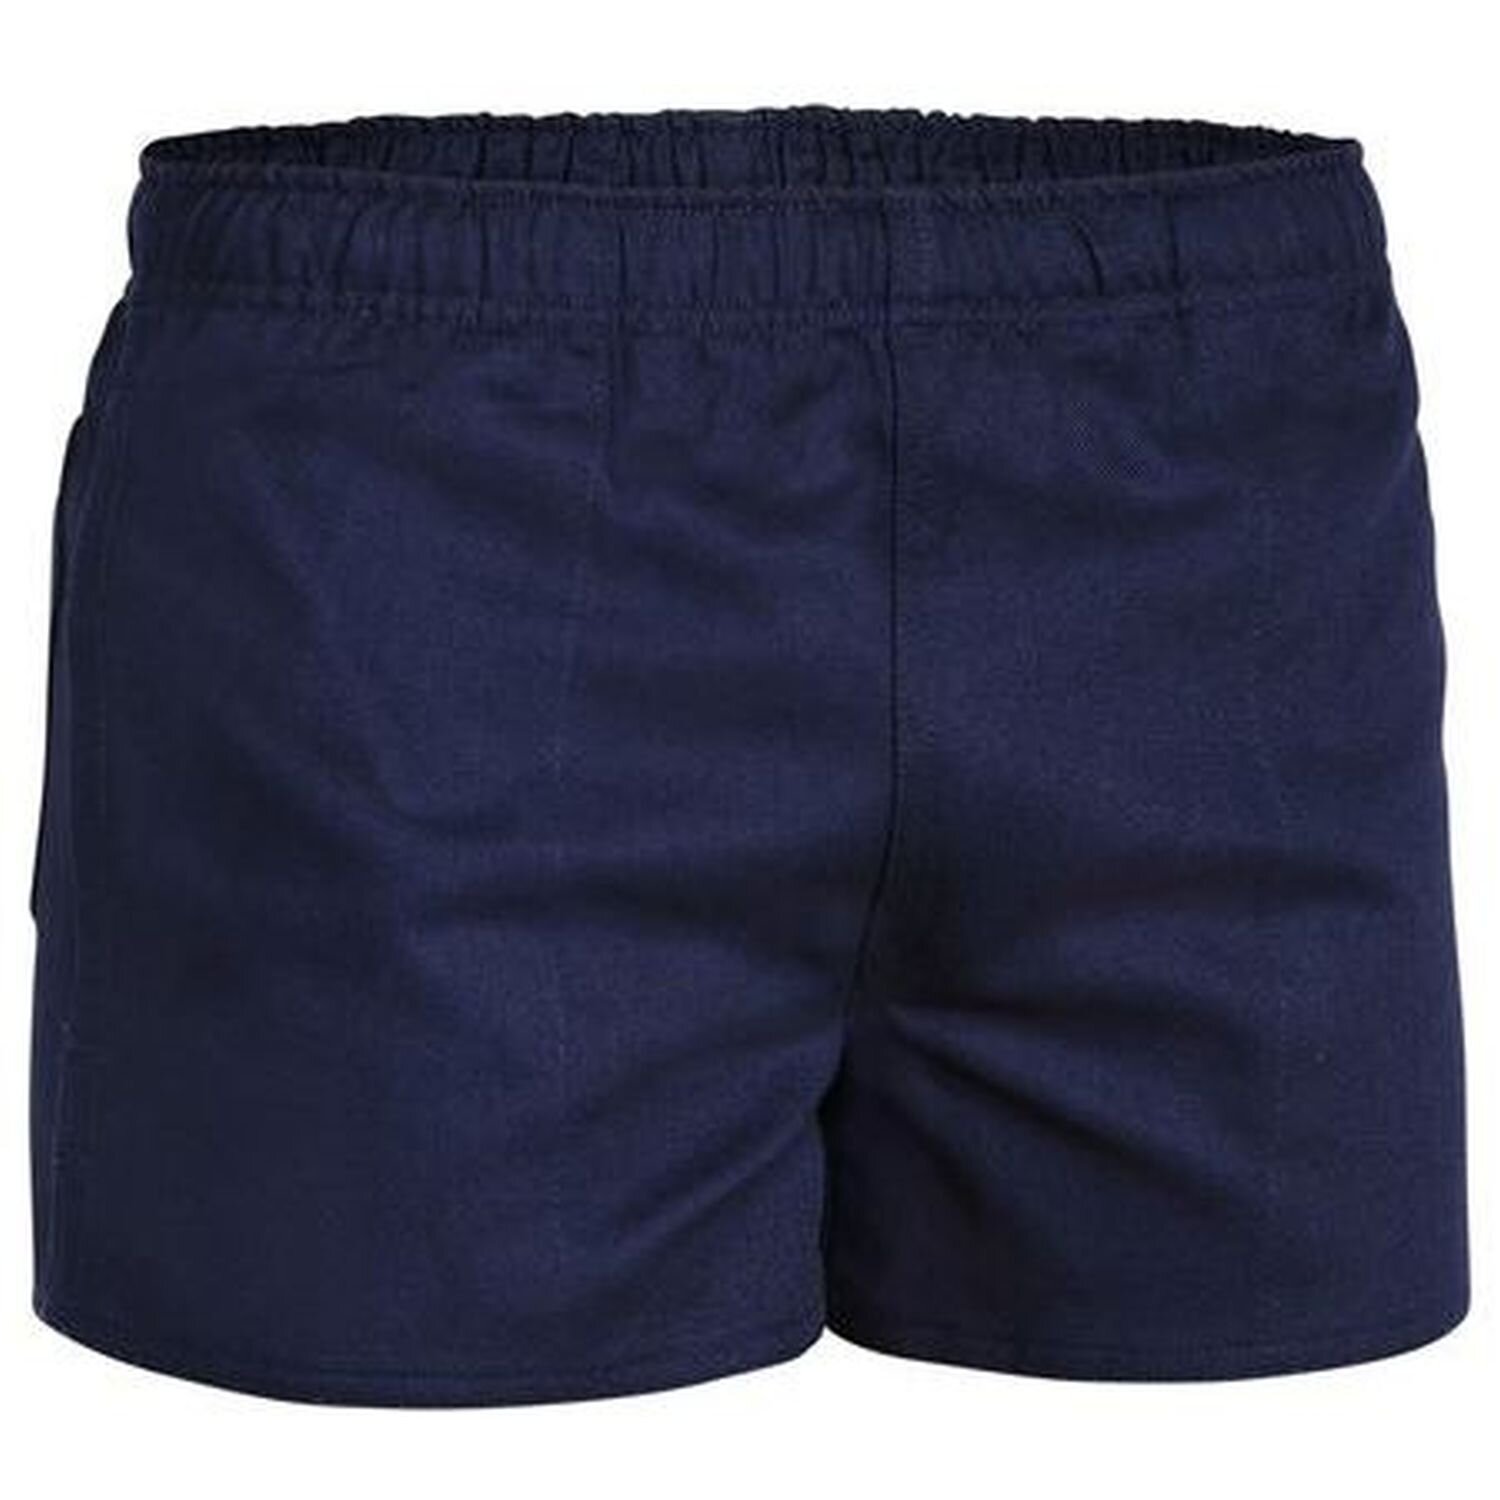 Mens Rugby Short with Pockets